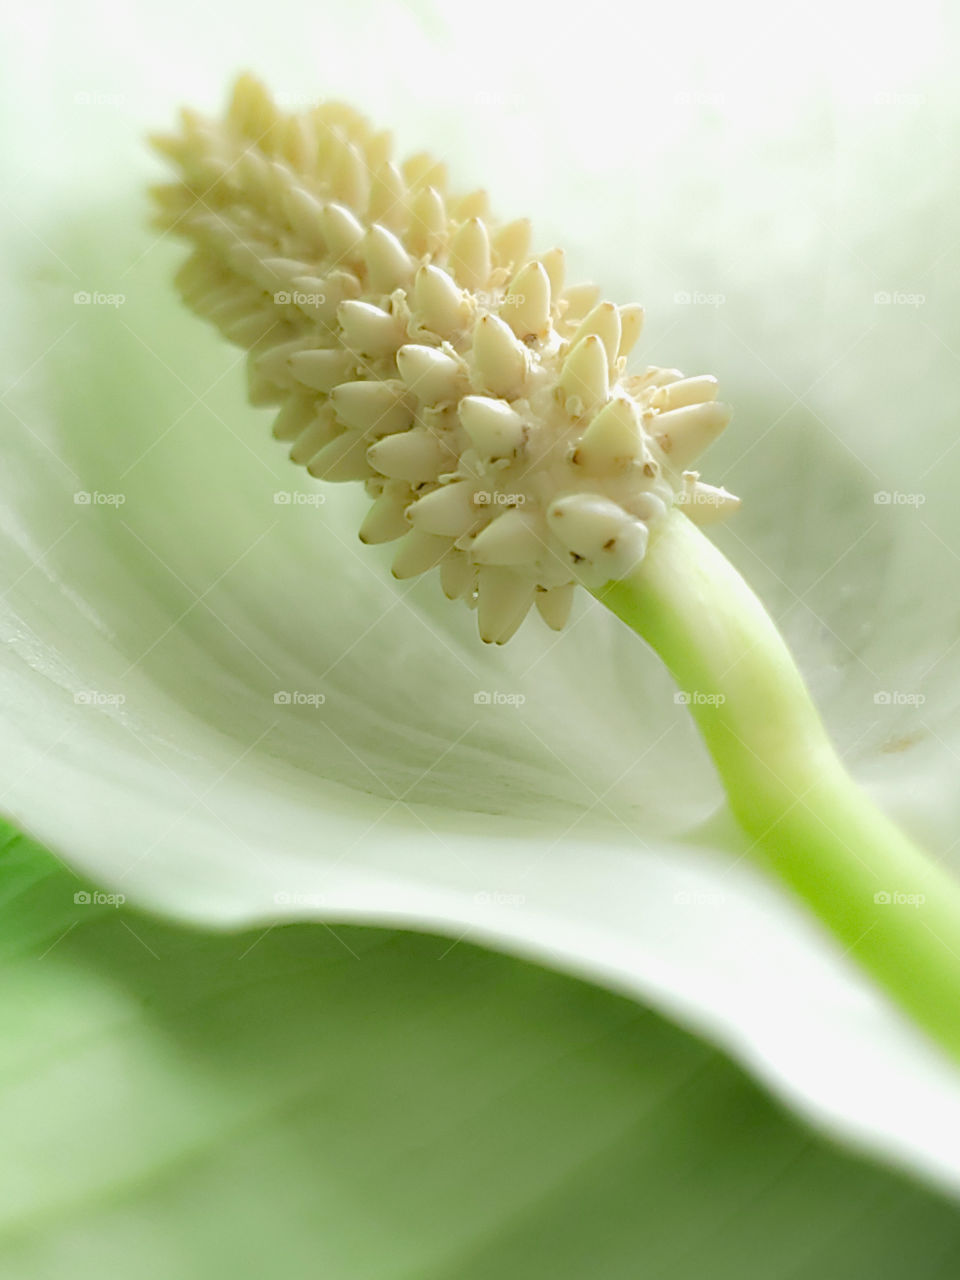 Closeup of a peace lily plant (Spathiphyllum), also known as closet plants. A sign of peace, innocence, purity, healing, hope, and prosperity.